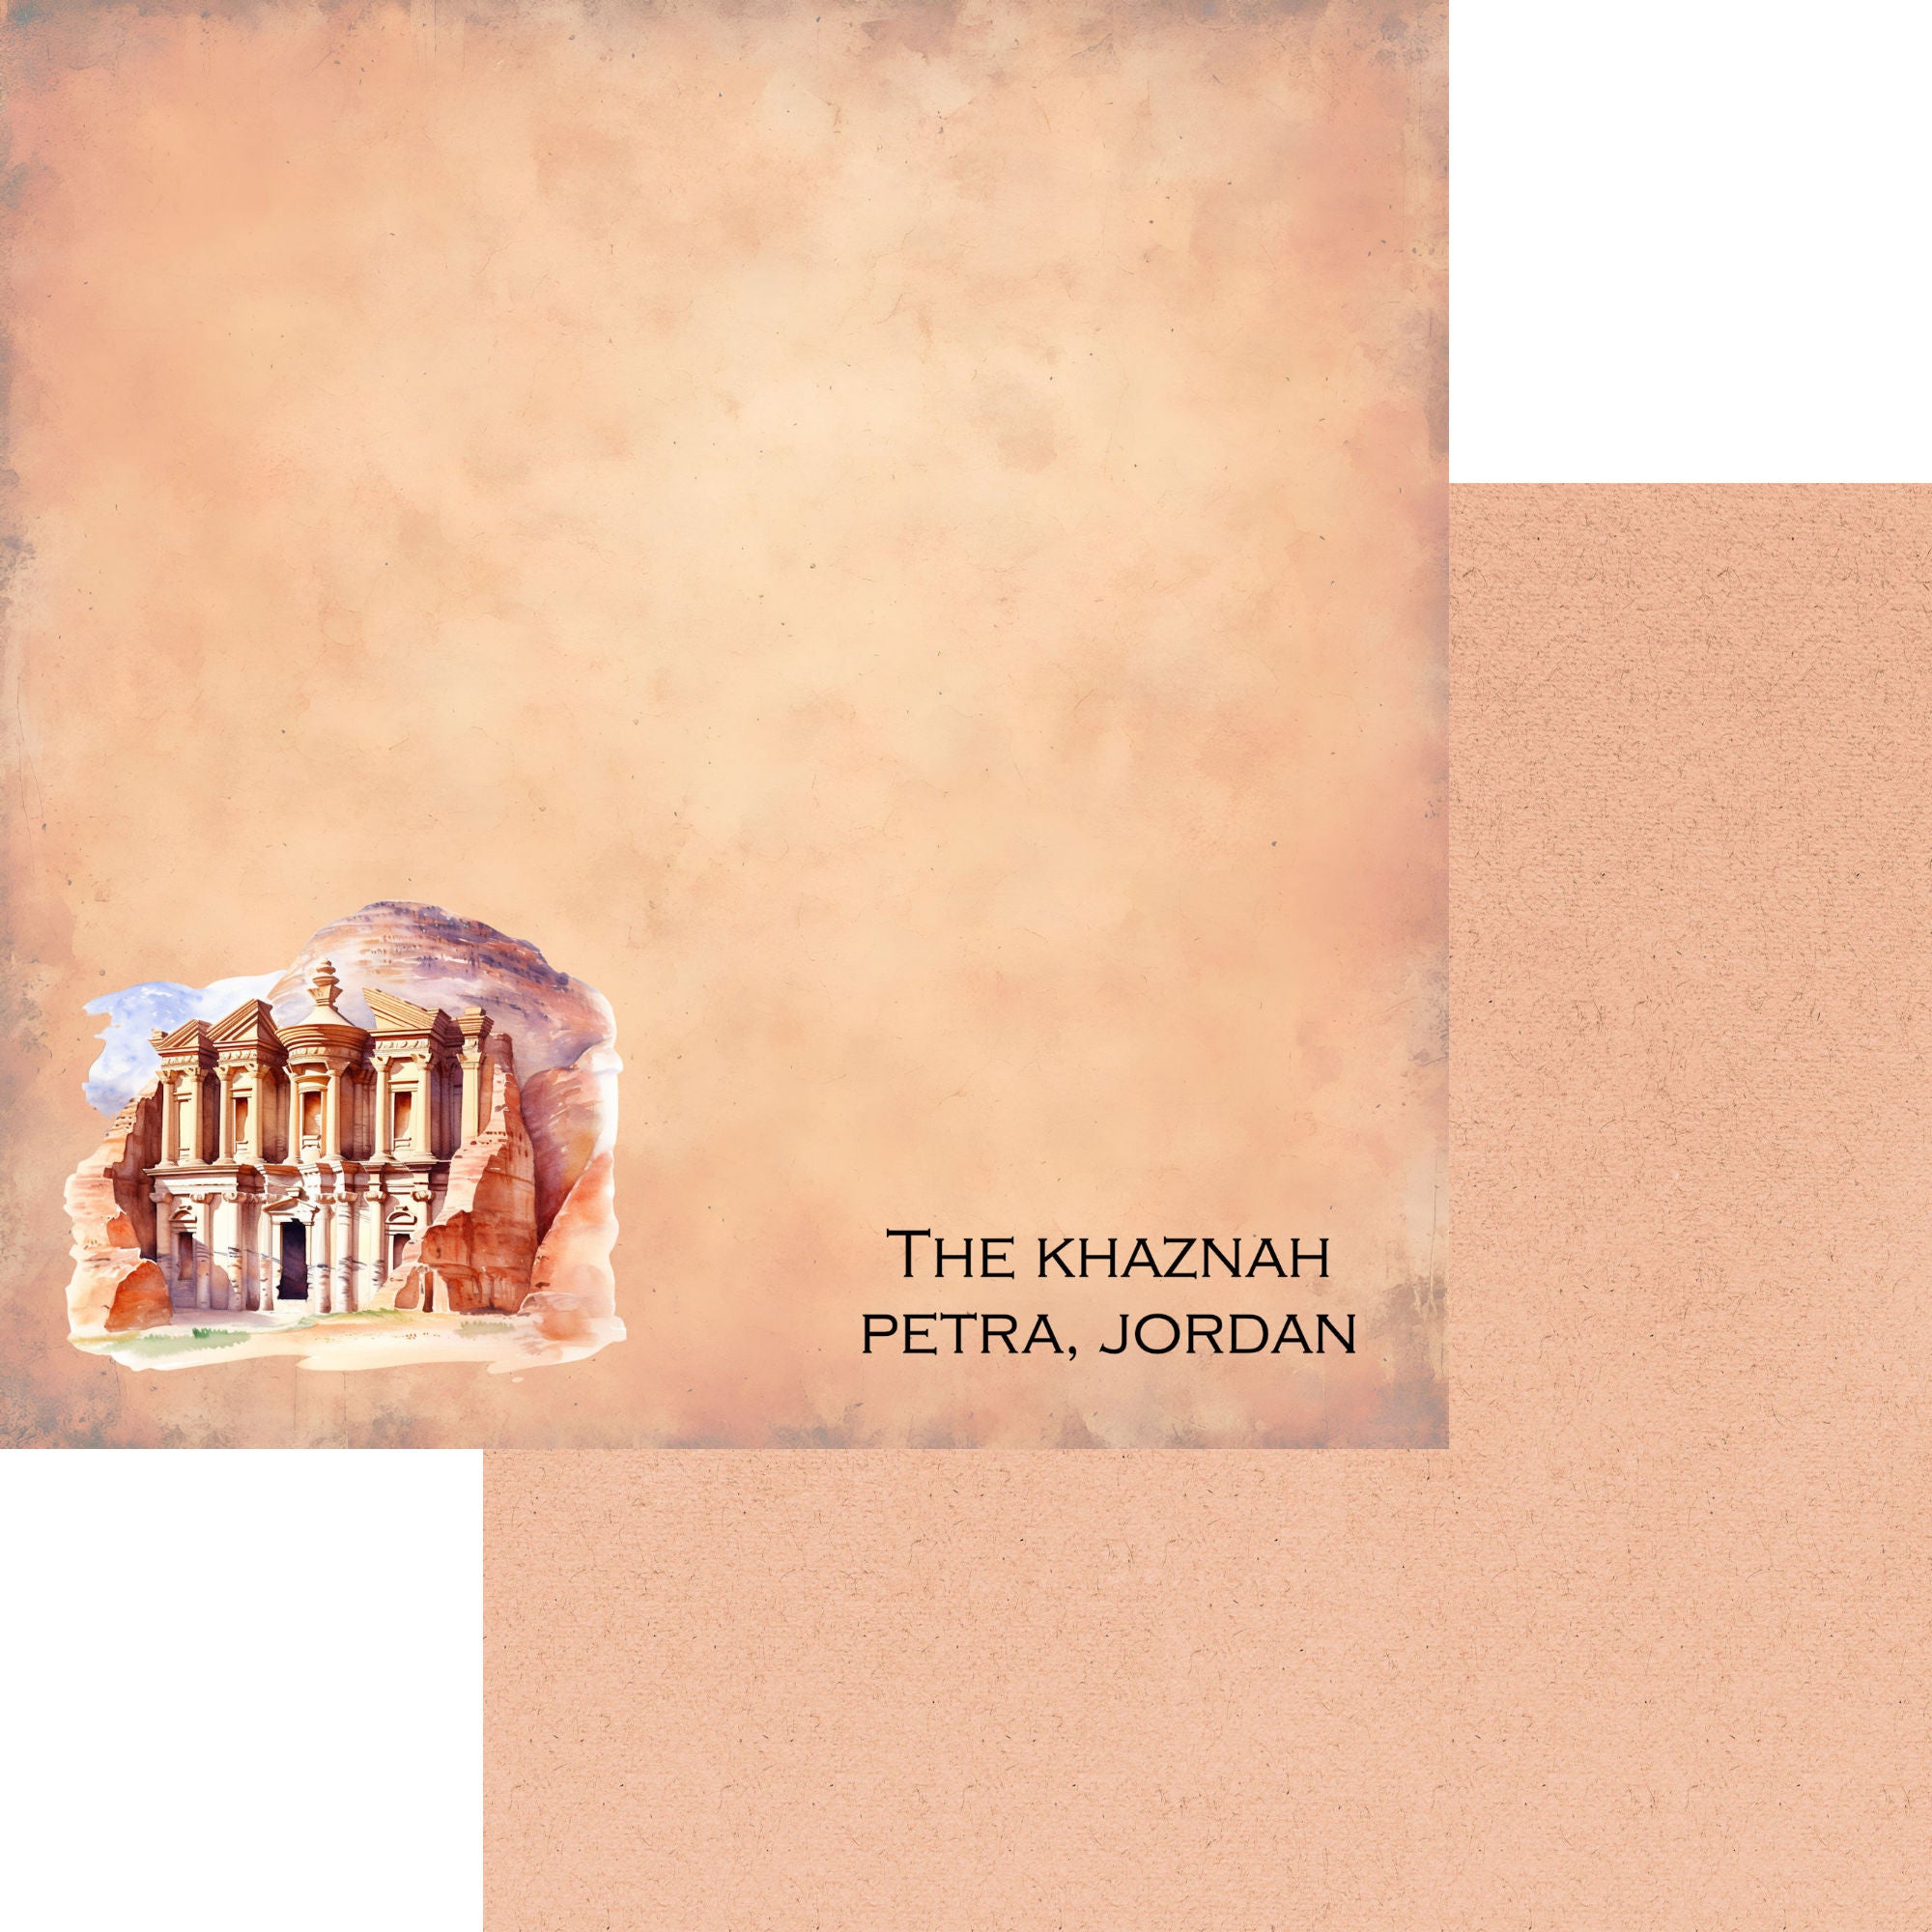 Seven Wonders Collection The Khaznah 12 x 12 Double-Sided Scrapbook Paper by SSC Designs